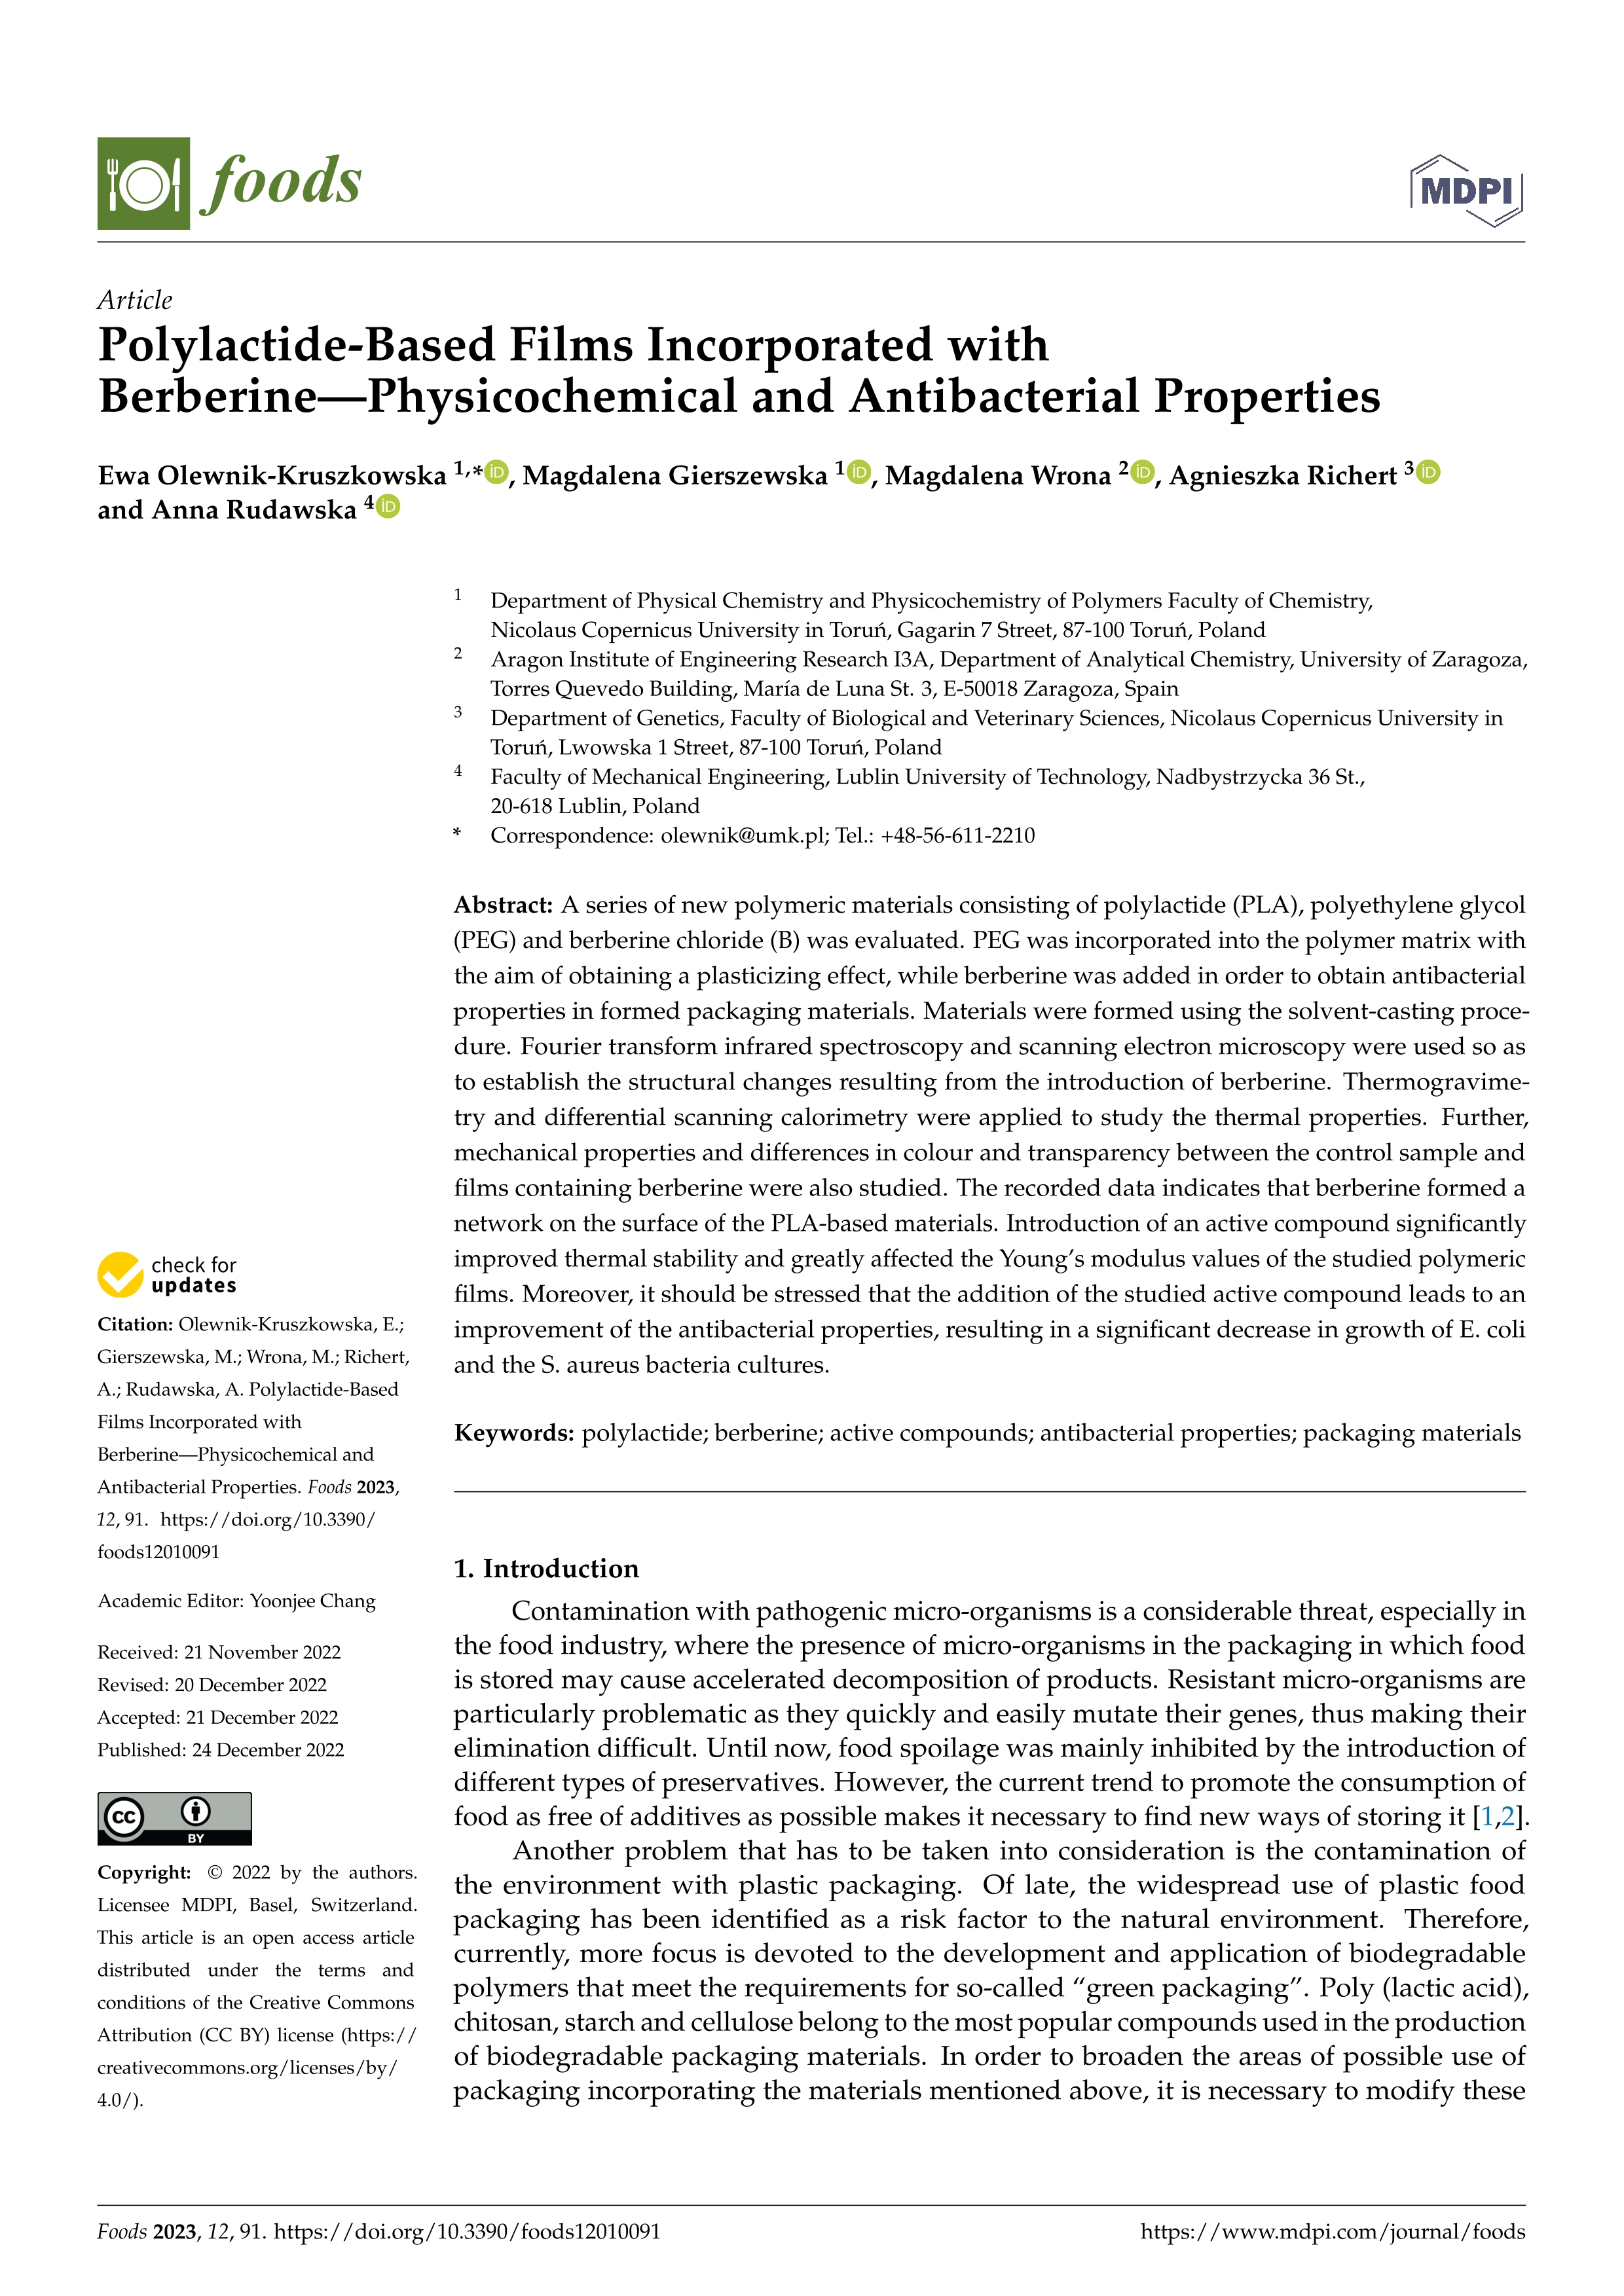 Polylactide-based films incorporated with berberine—physicochemical and antibacterial properties